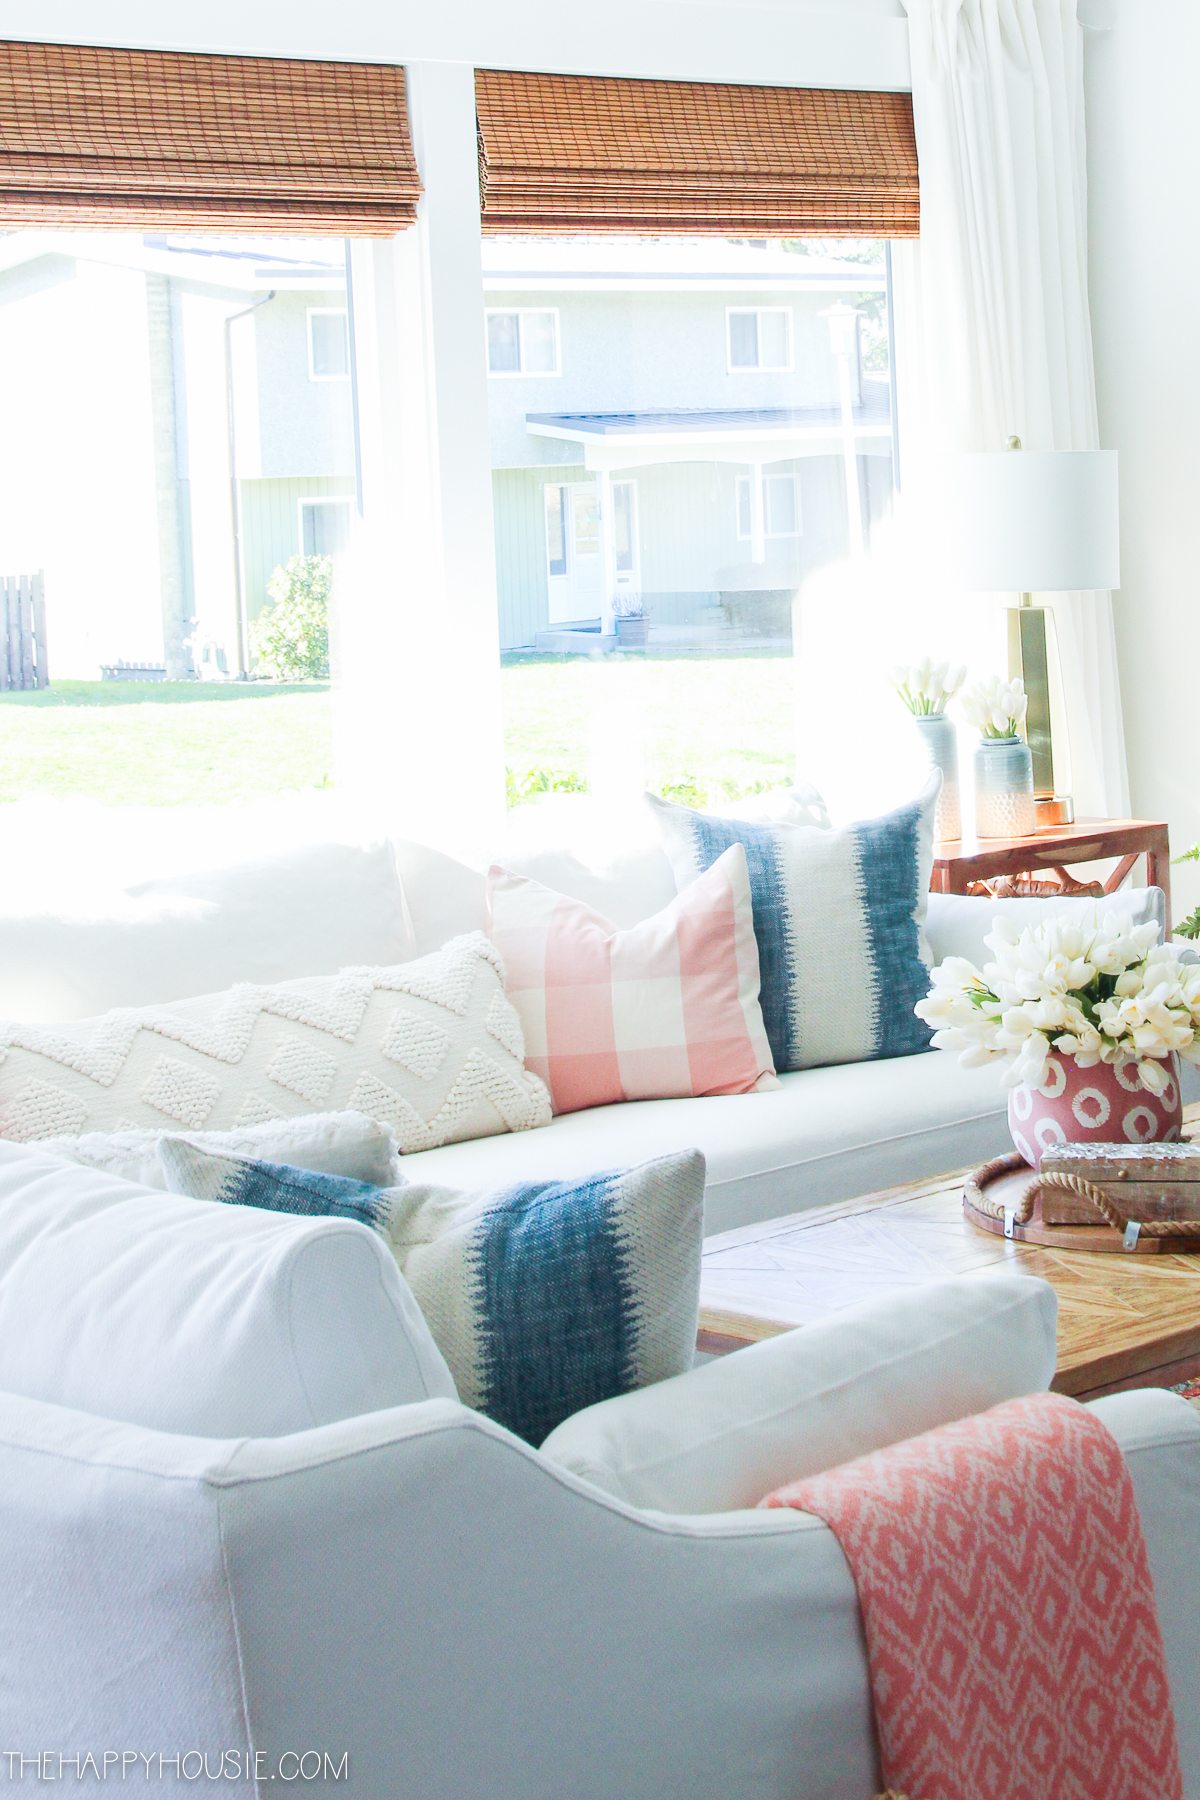 Blue, pink and white throw pillows on the couch.